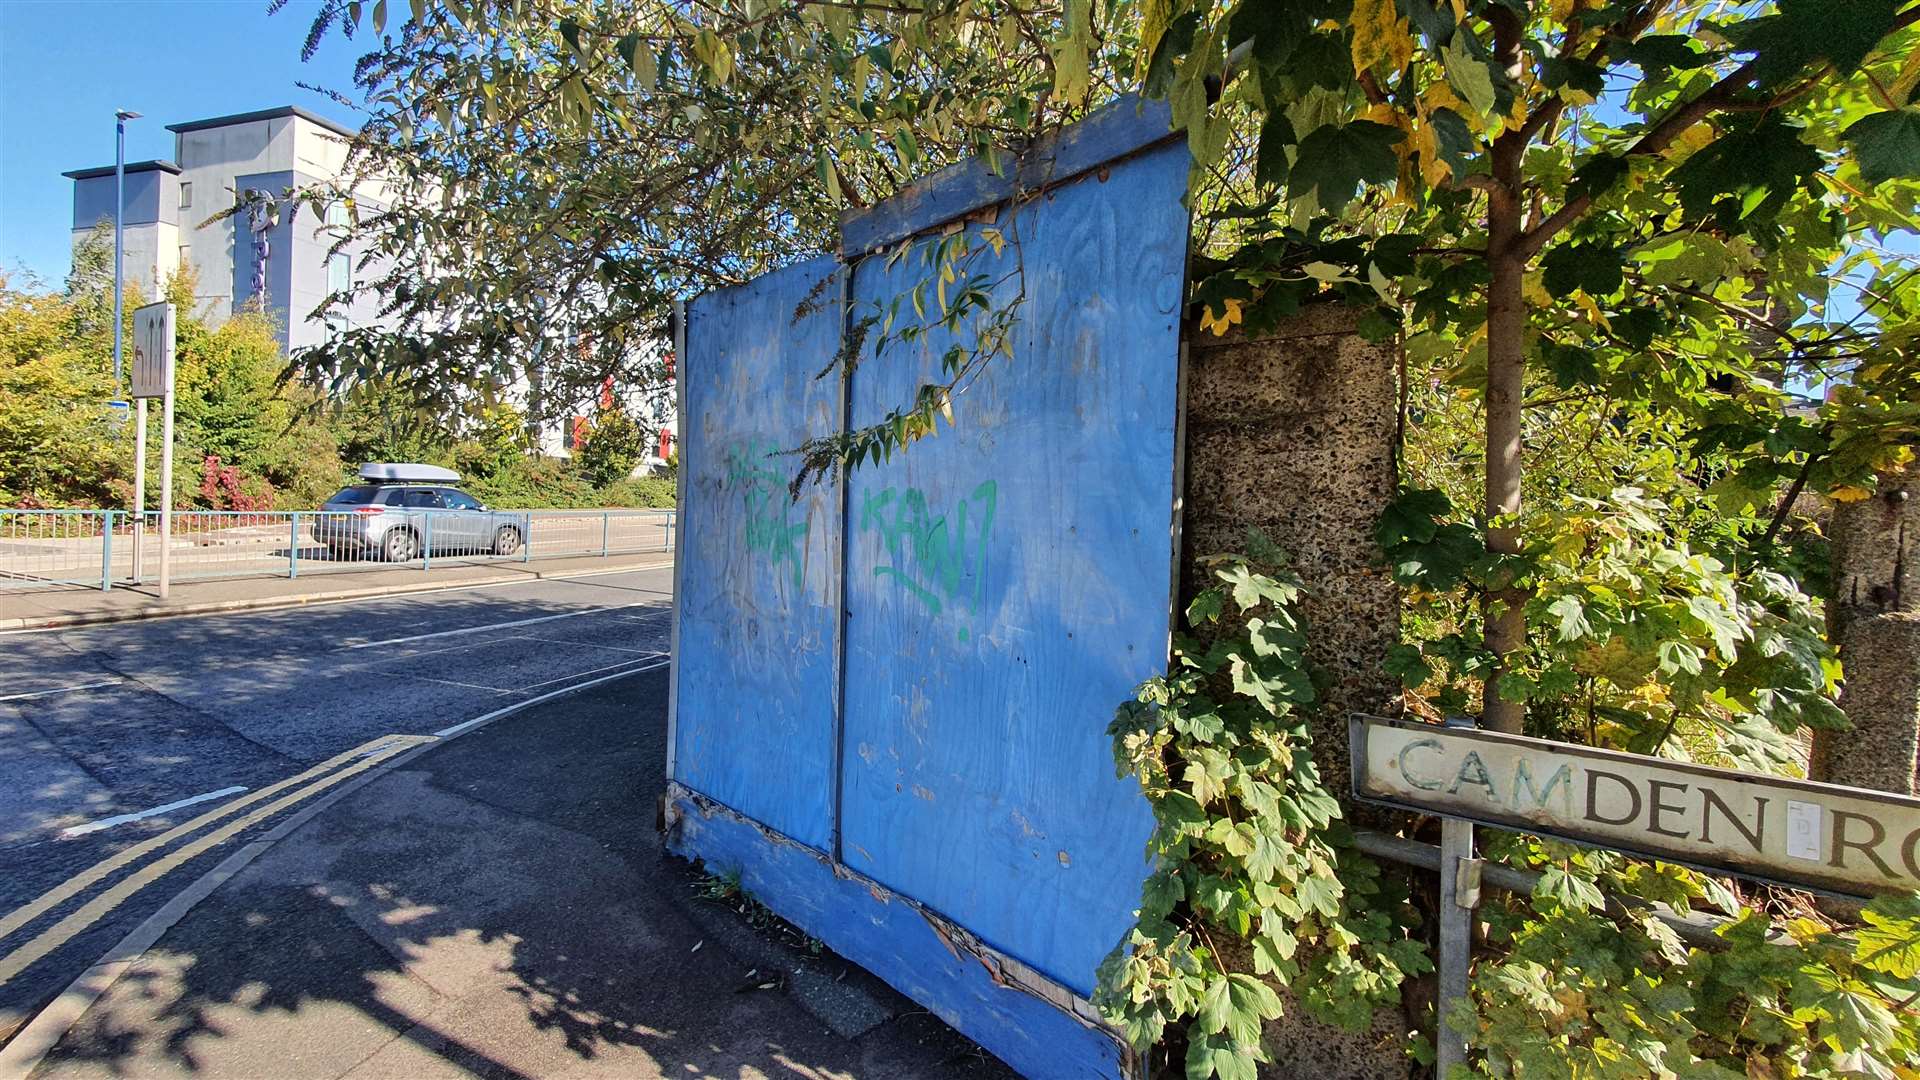 The blue hoardings in Pier Road, Gillingham have been on hire since they were put up in 2011 after the wall first began crumbling in 2009